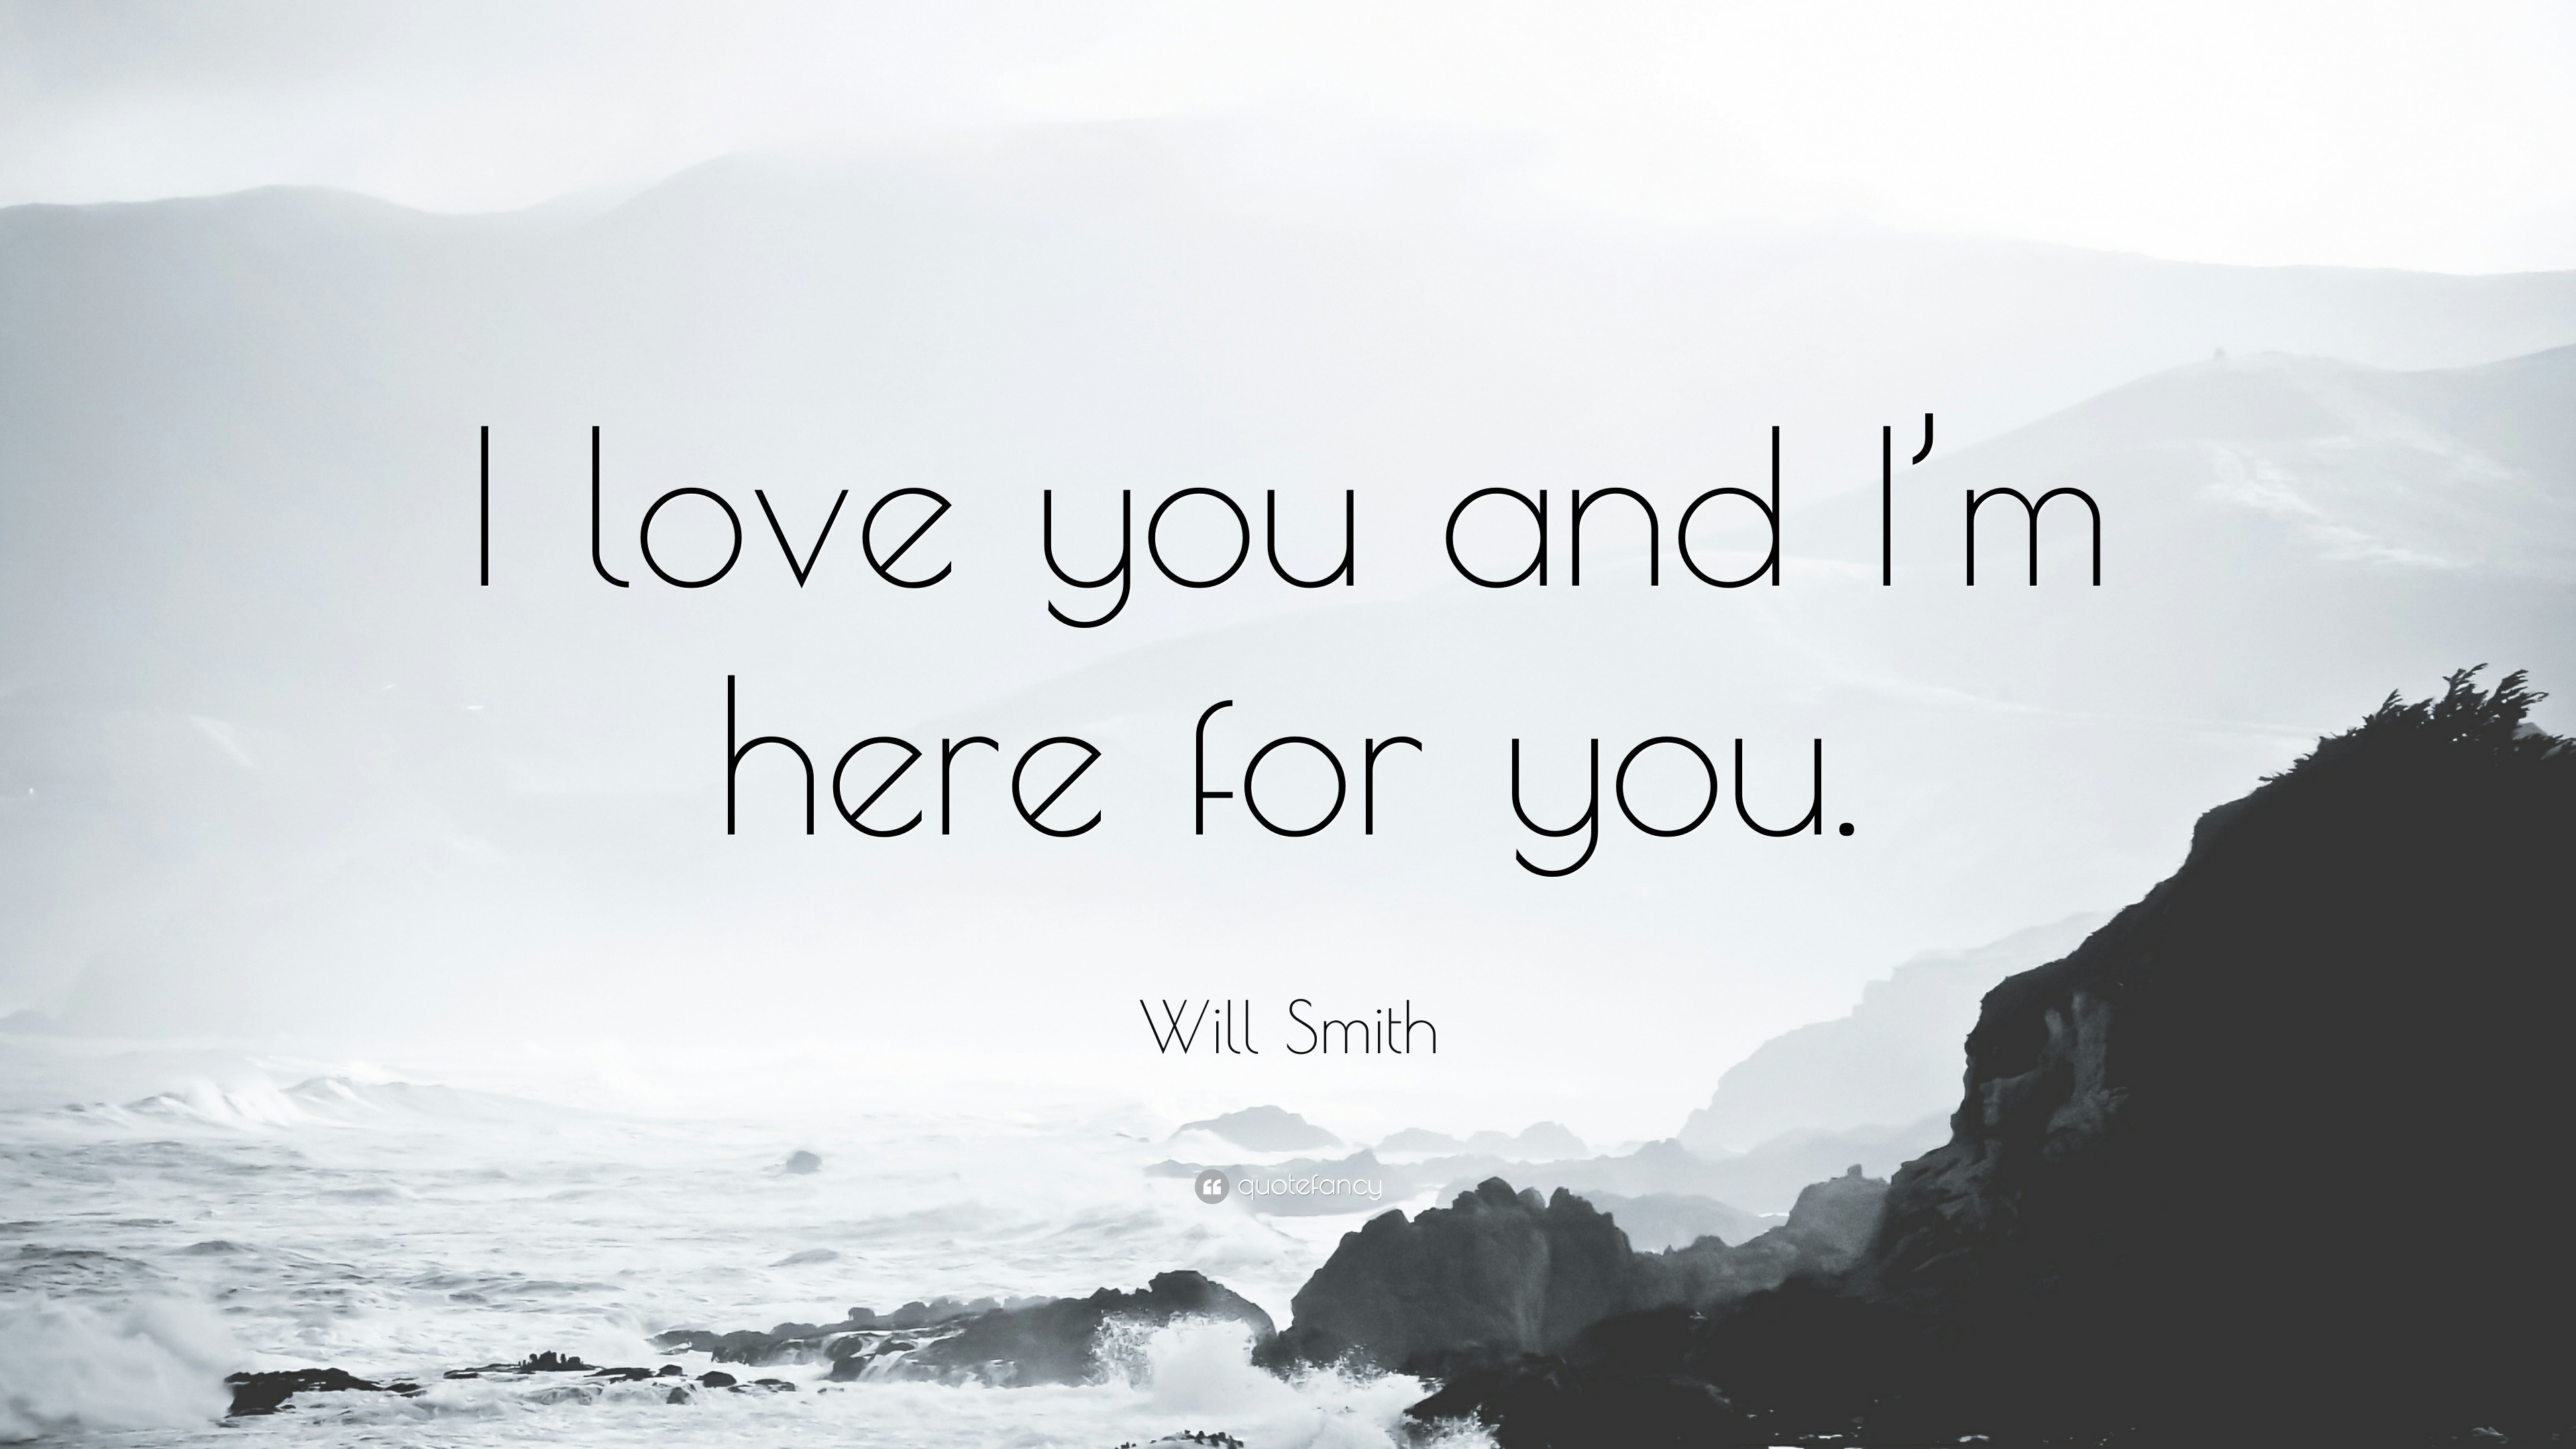 Will Smith Quote “I love you and I m here for you